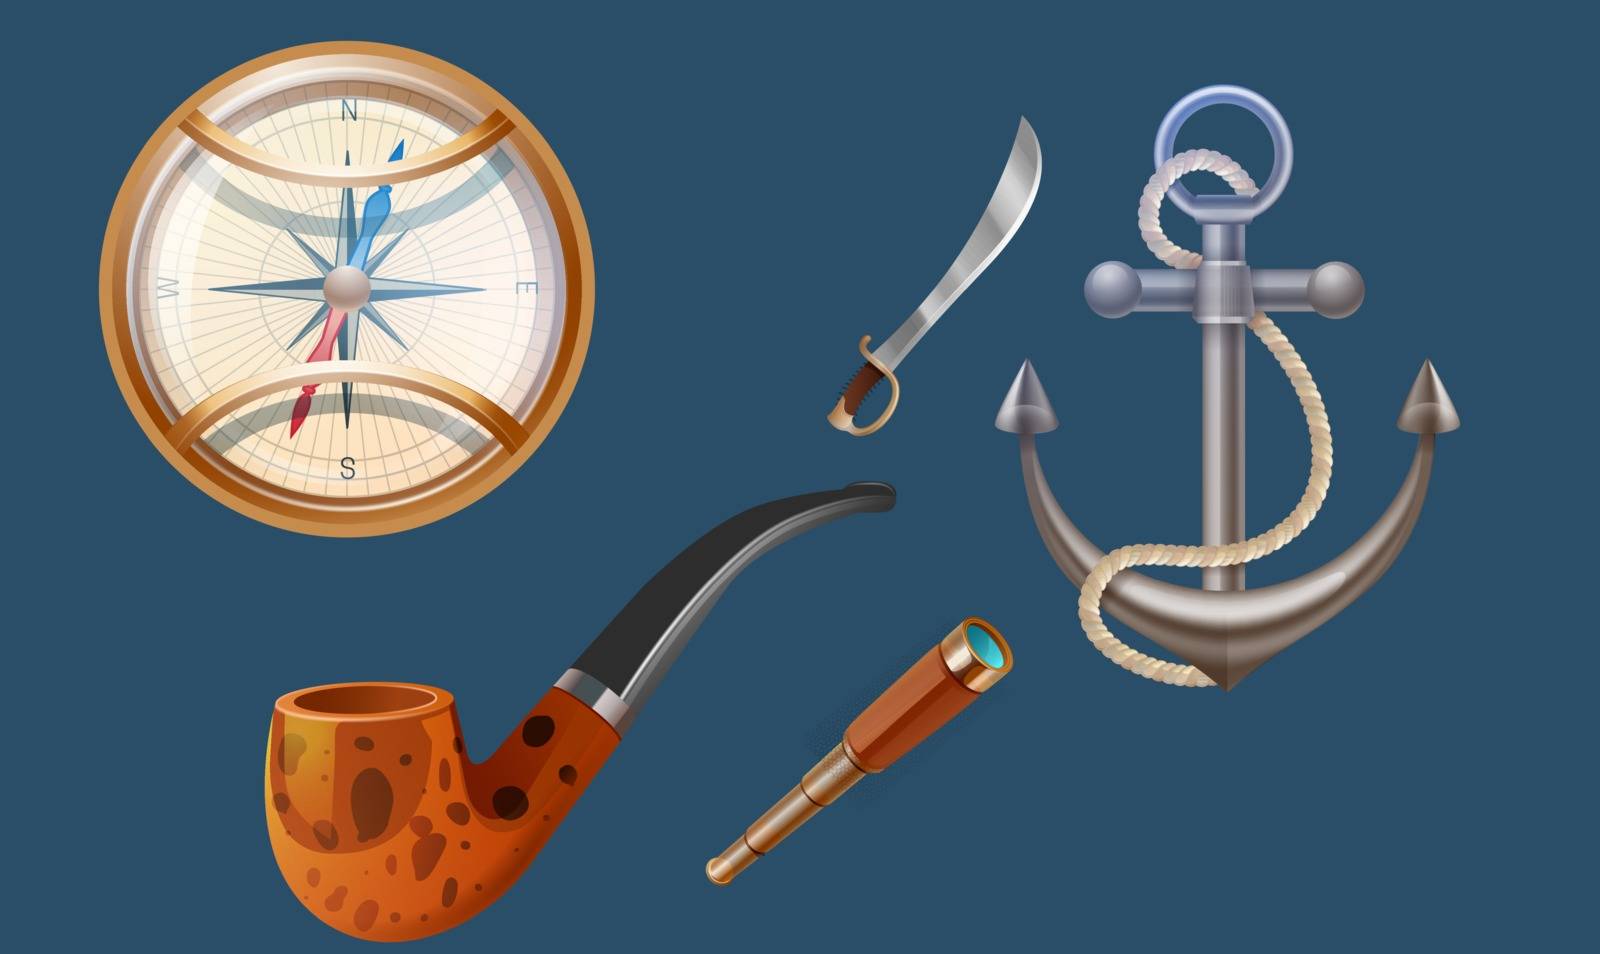 mock up illustration of treasure hunt game equipment on abstract backgrounds by aanavcreationsplus